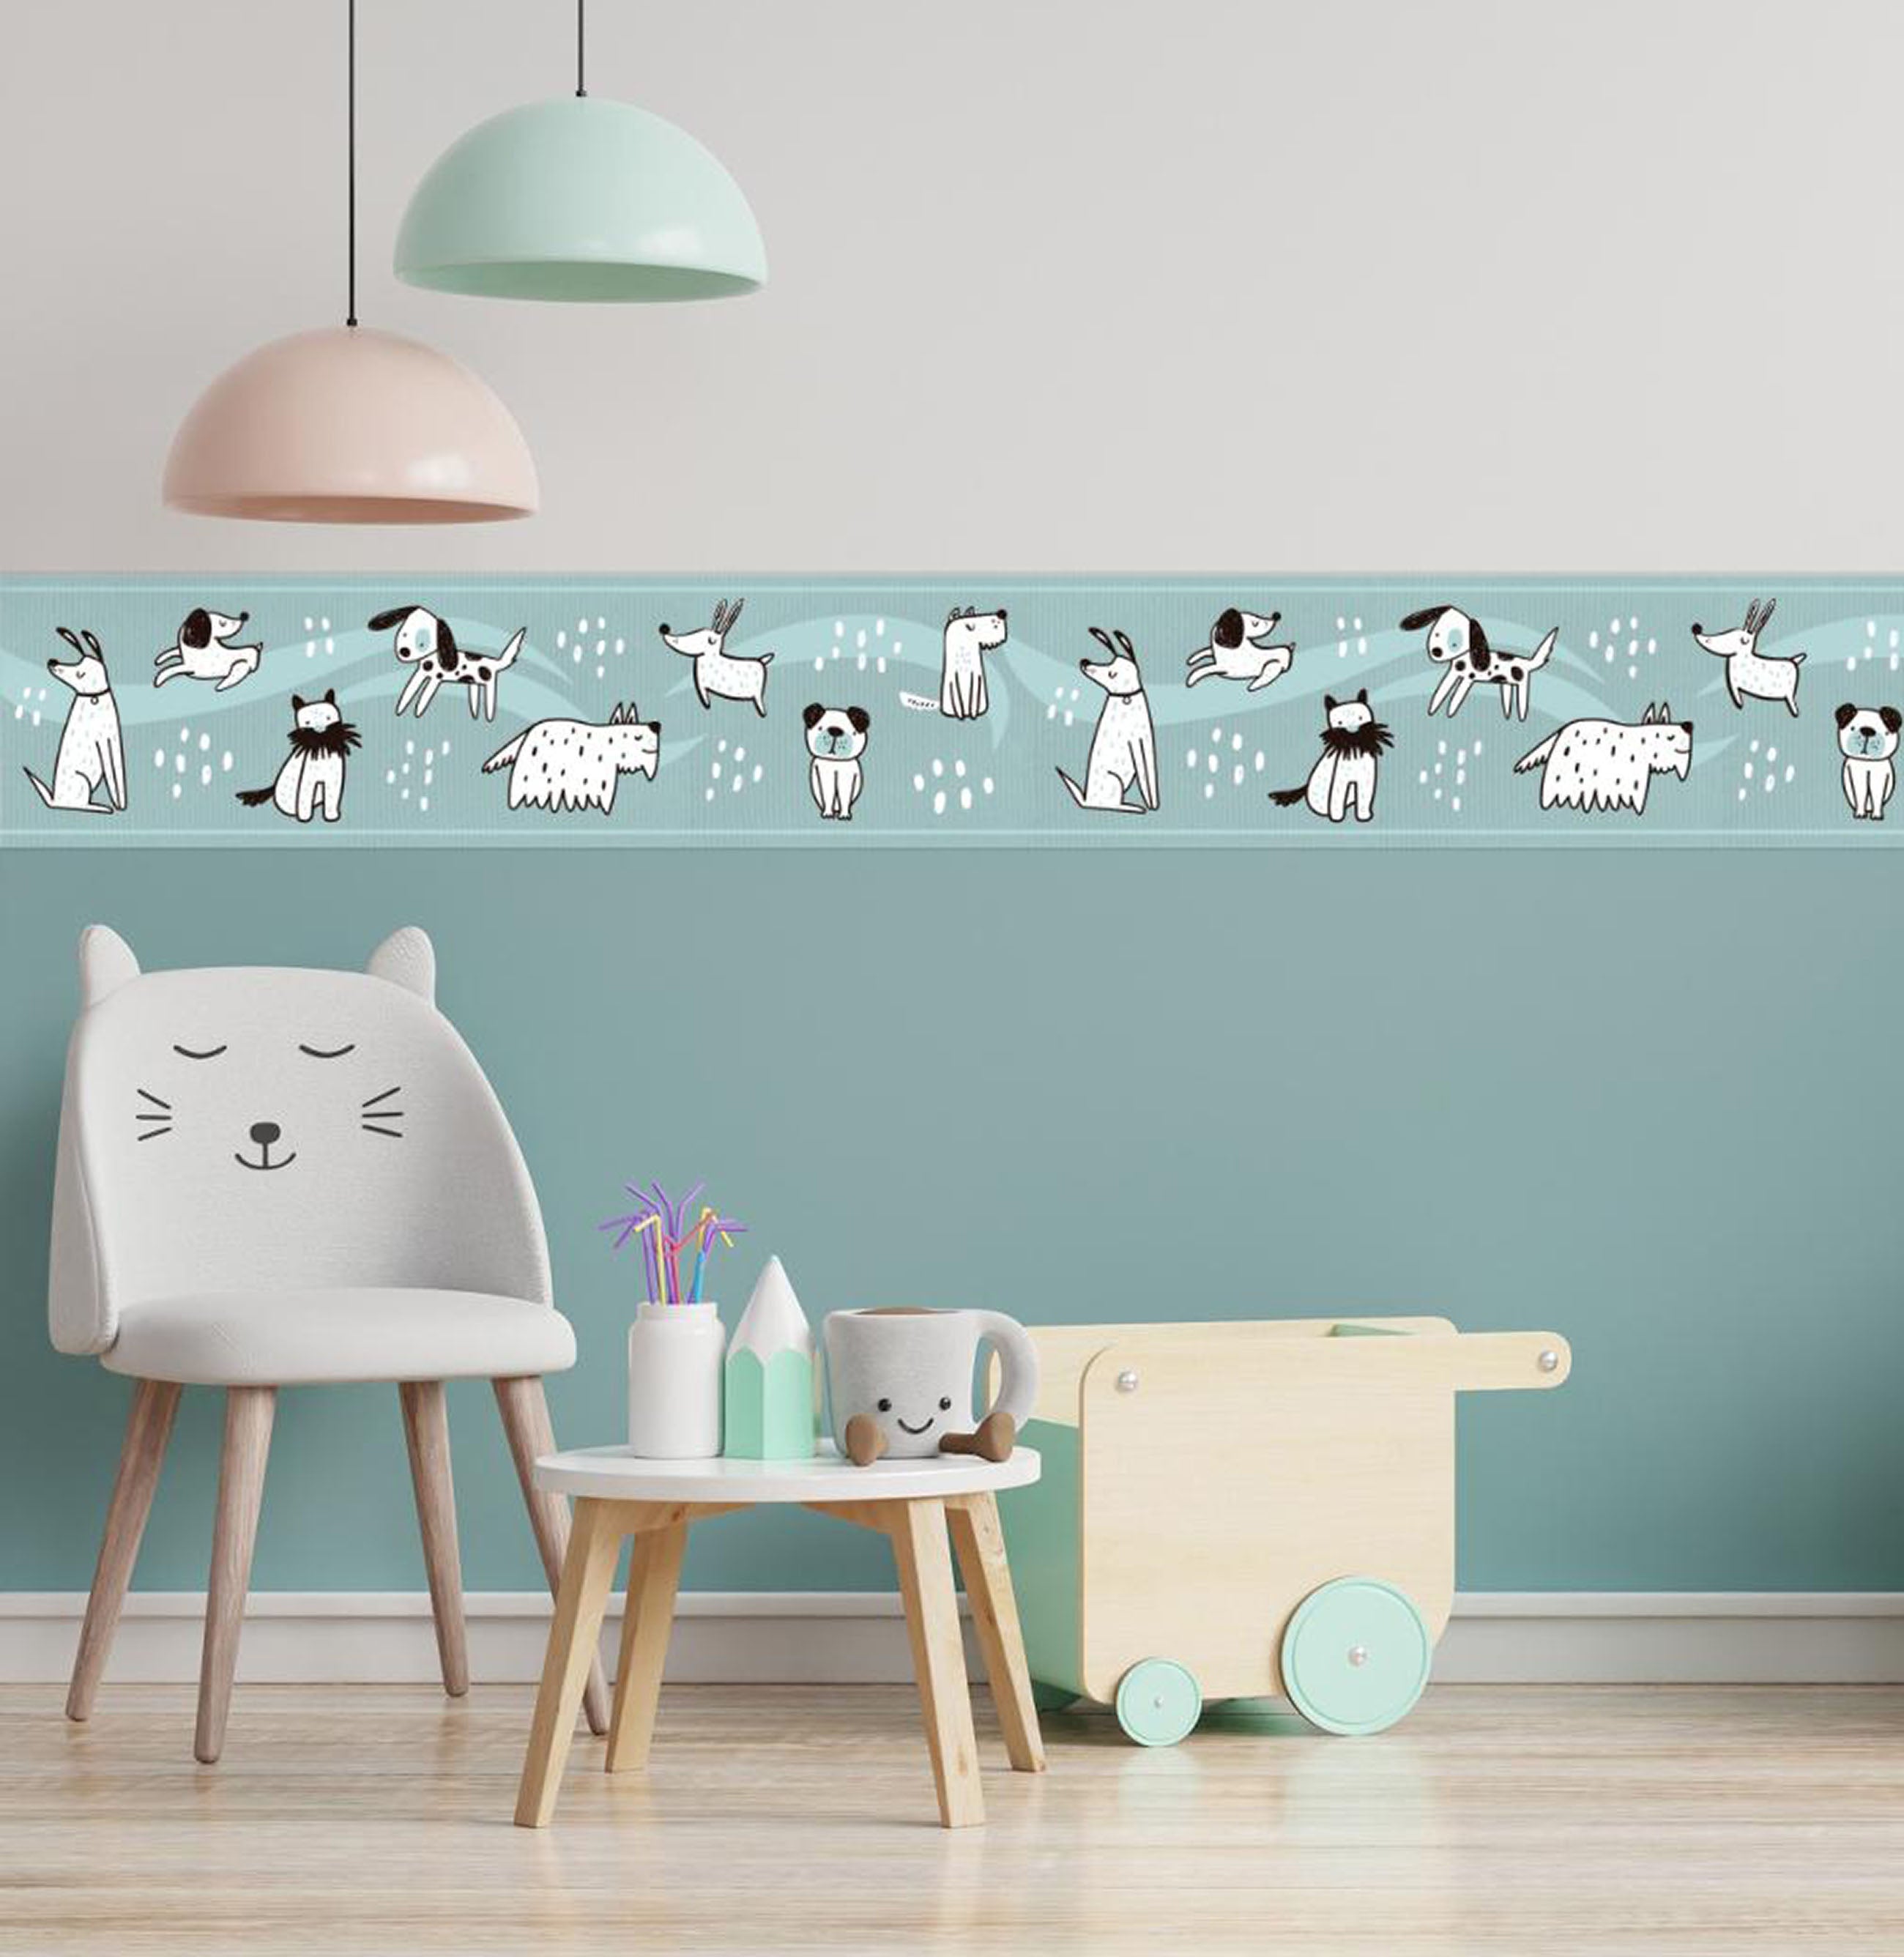 GB90190 Grace & Gardenia Hand Drawn Dogs Peel and Stick Wallpaper Border 10in Height x 18ft Long, Blue White Black